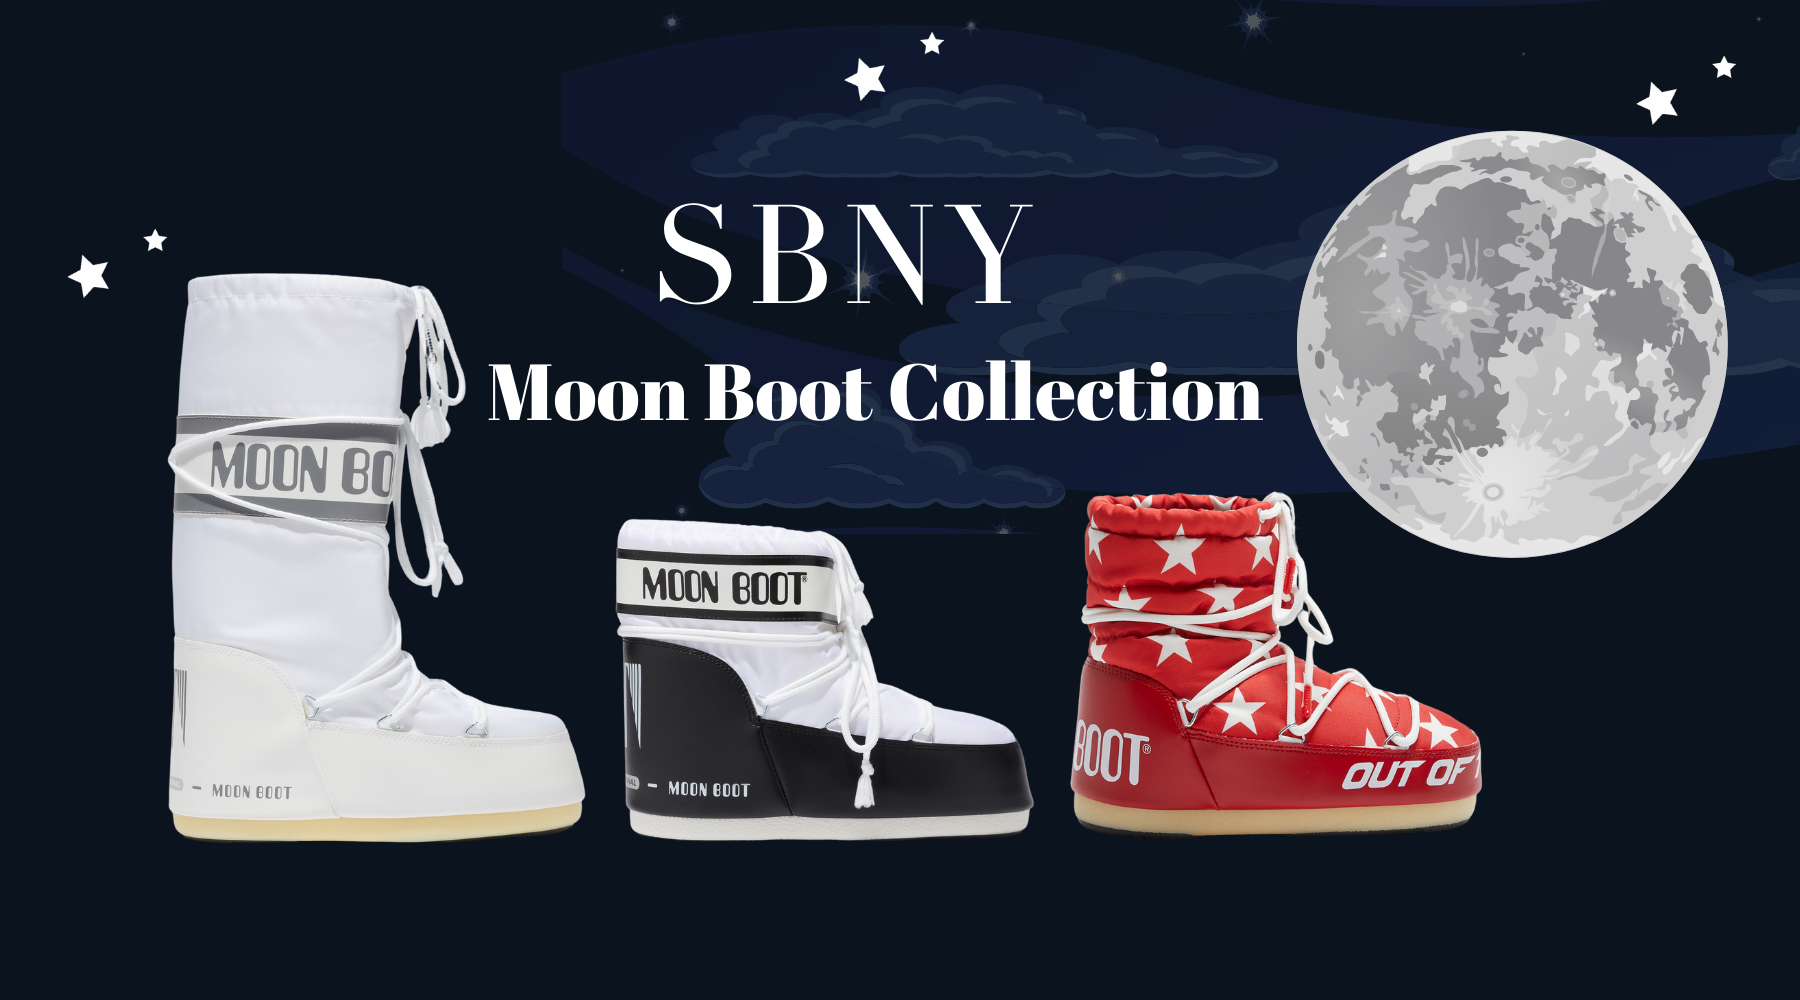 Featured Moon Boots from SBNY Collection